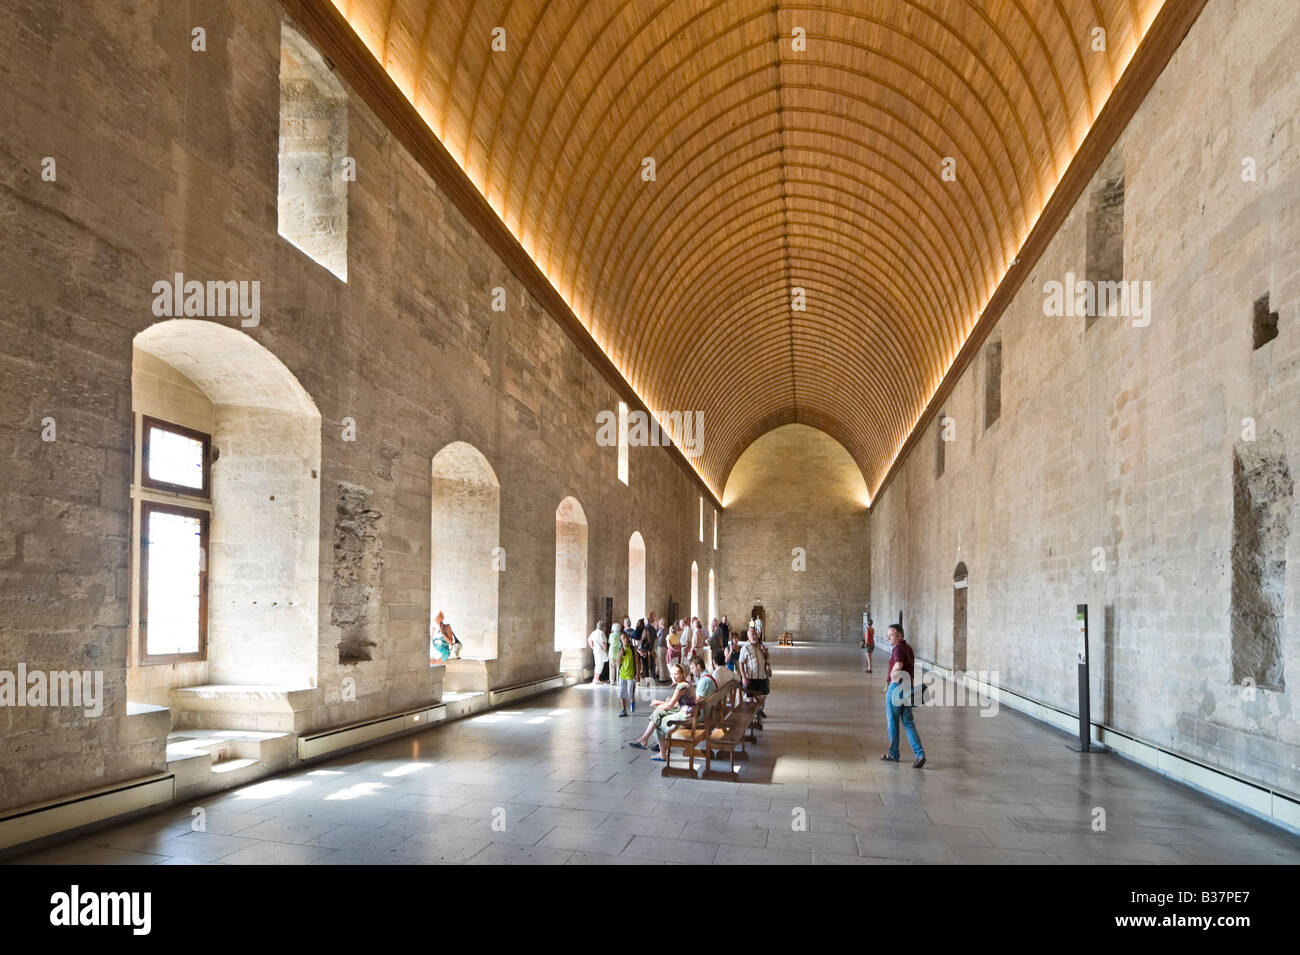 Grand Tinel Banqueting Hall in the Old Palace, Palais des Papes, Avignon, Provence, France Stock Photo